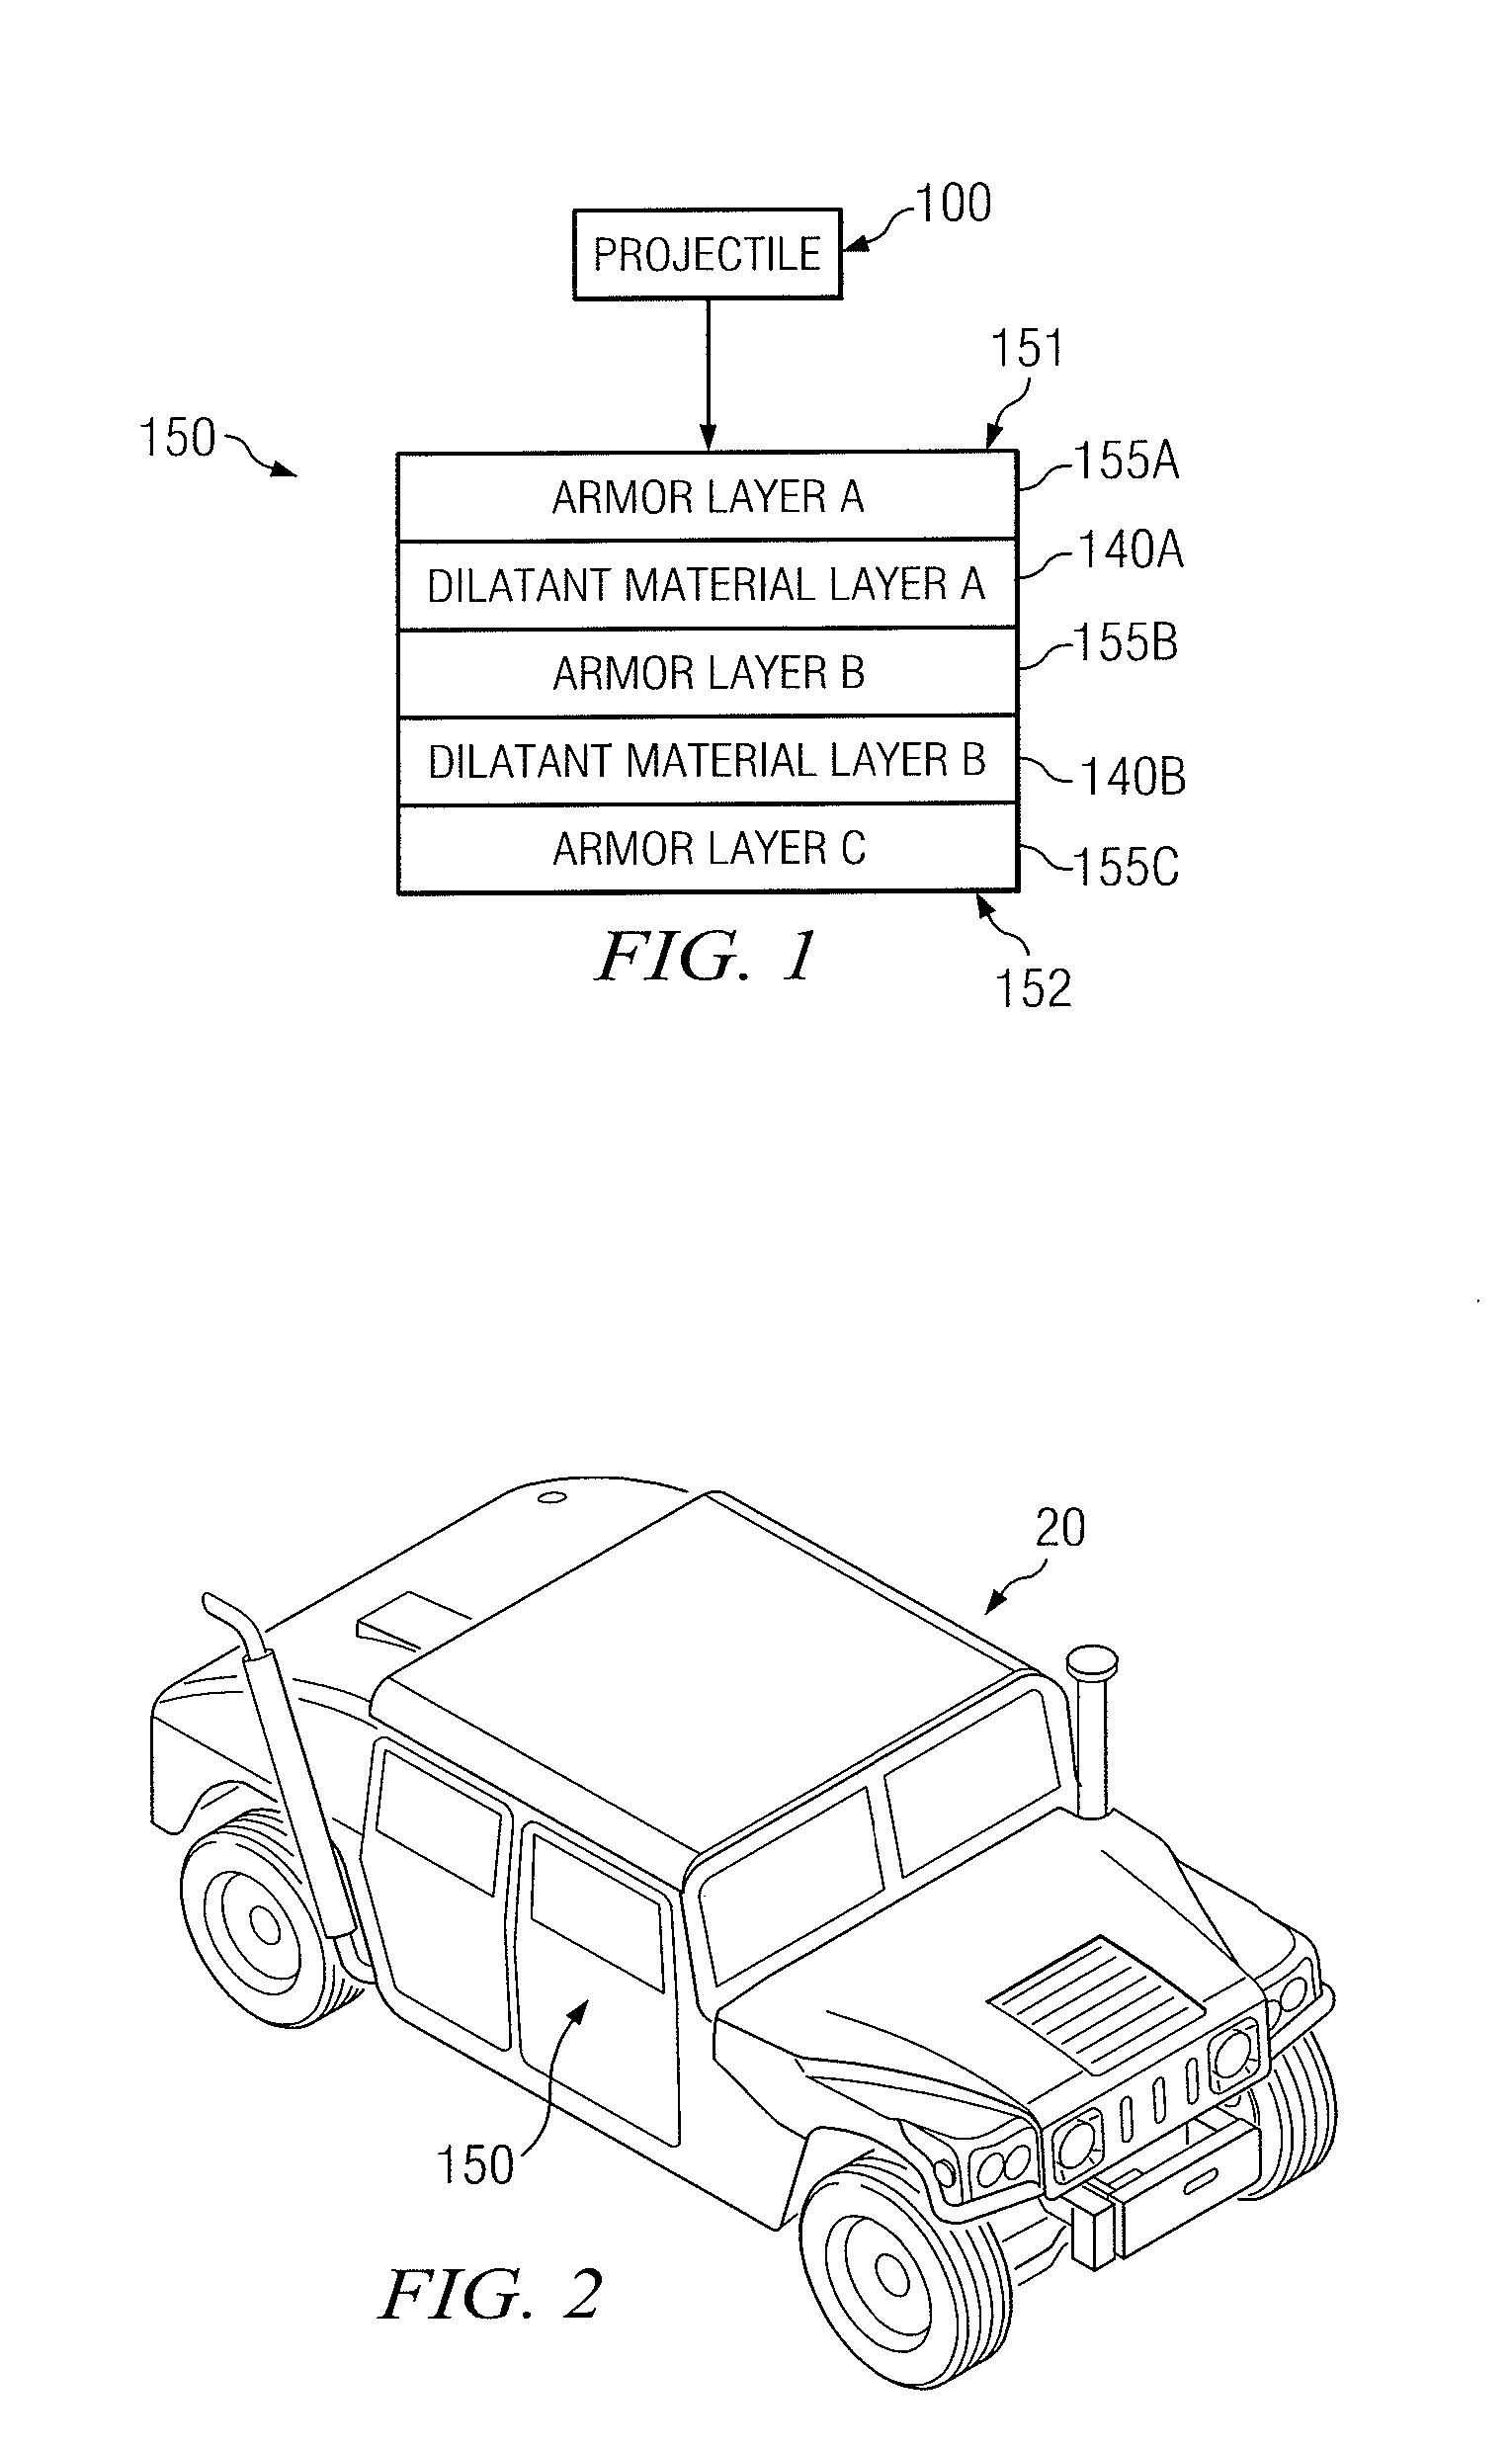 Armor System Comprising Dilatant Material To Improve Armor Protection